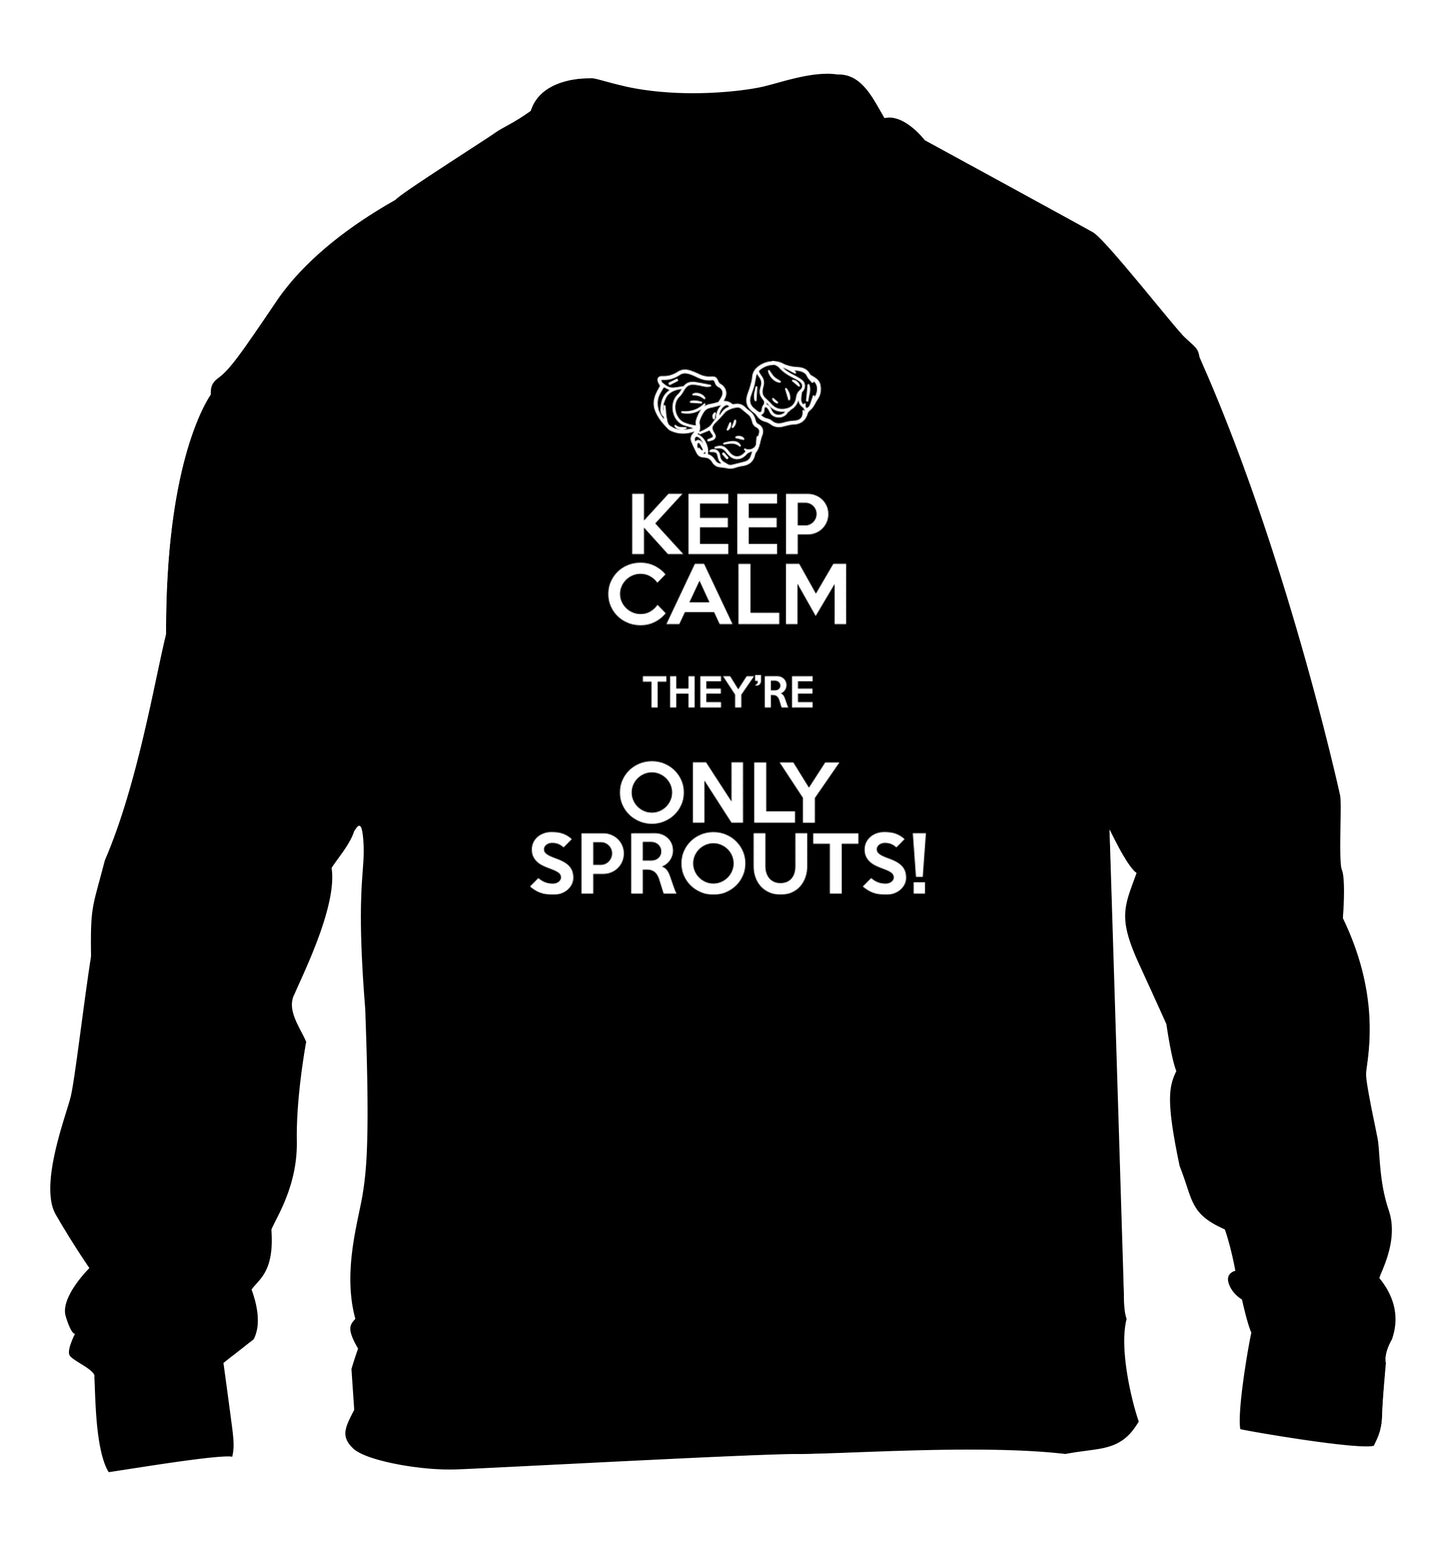 Keep calm they're only sprouts children's black sweater 12-13 Years